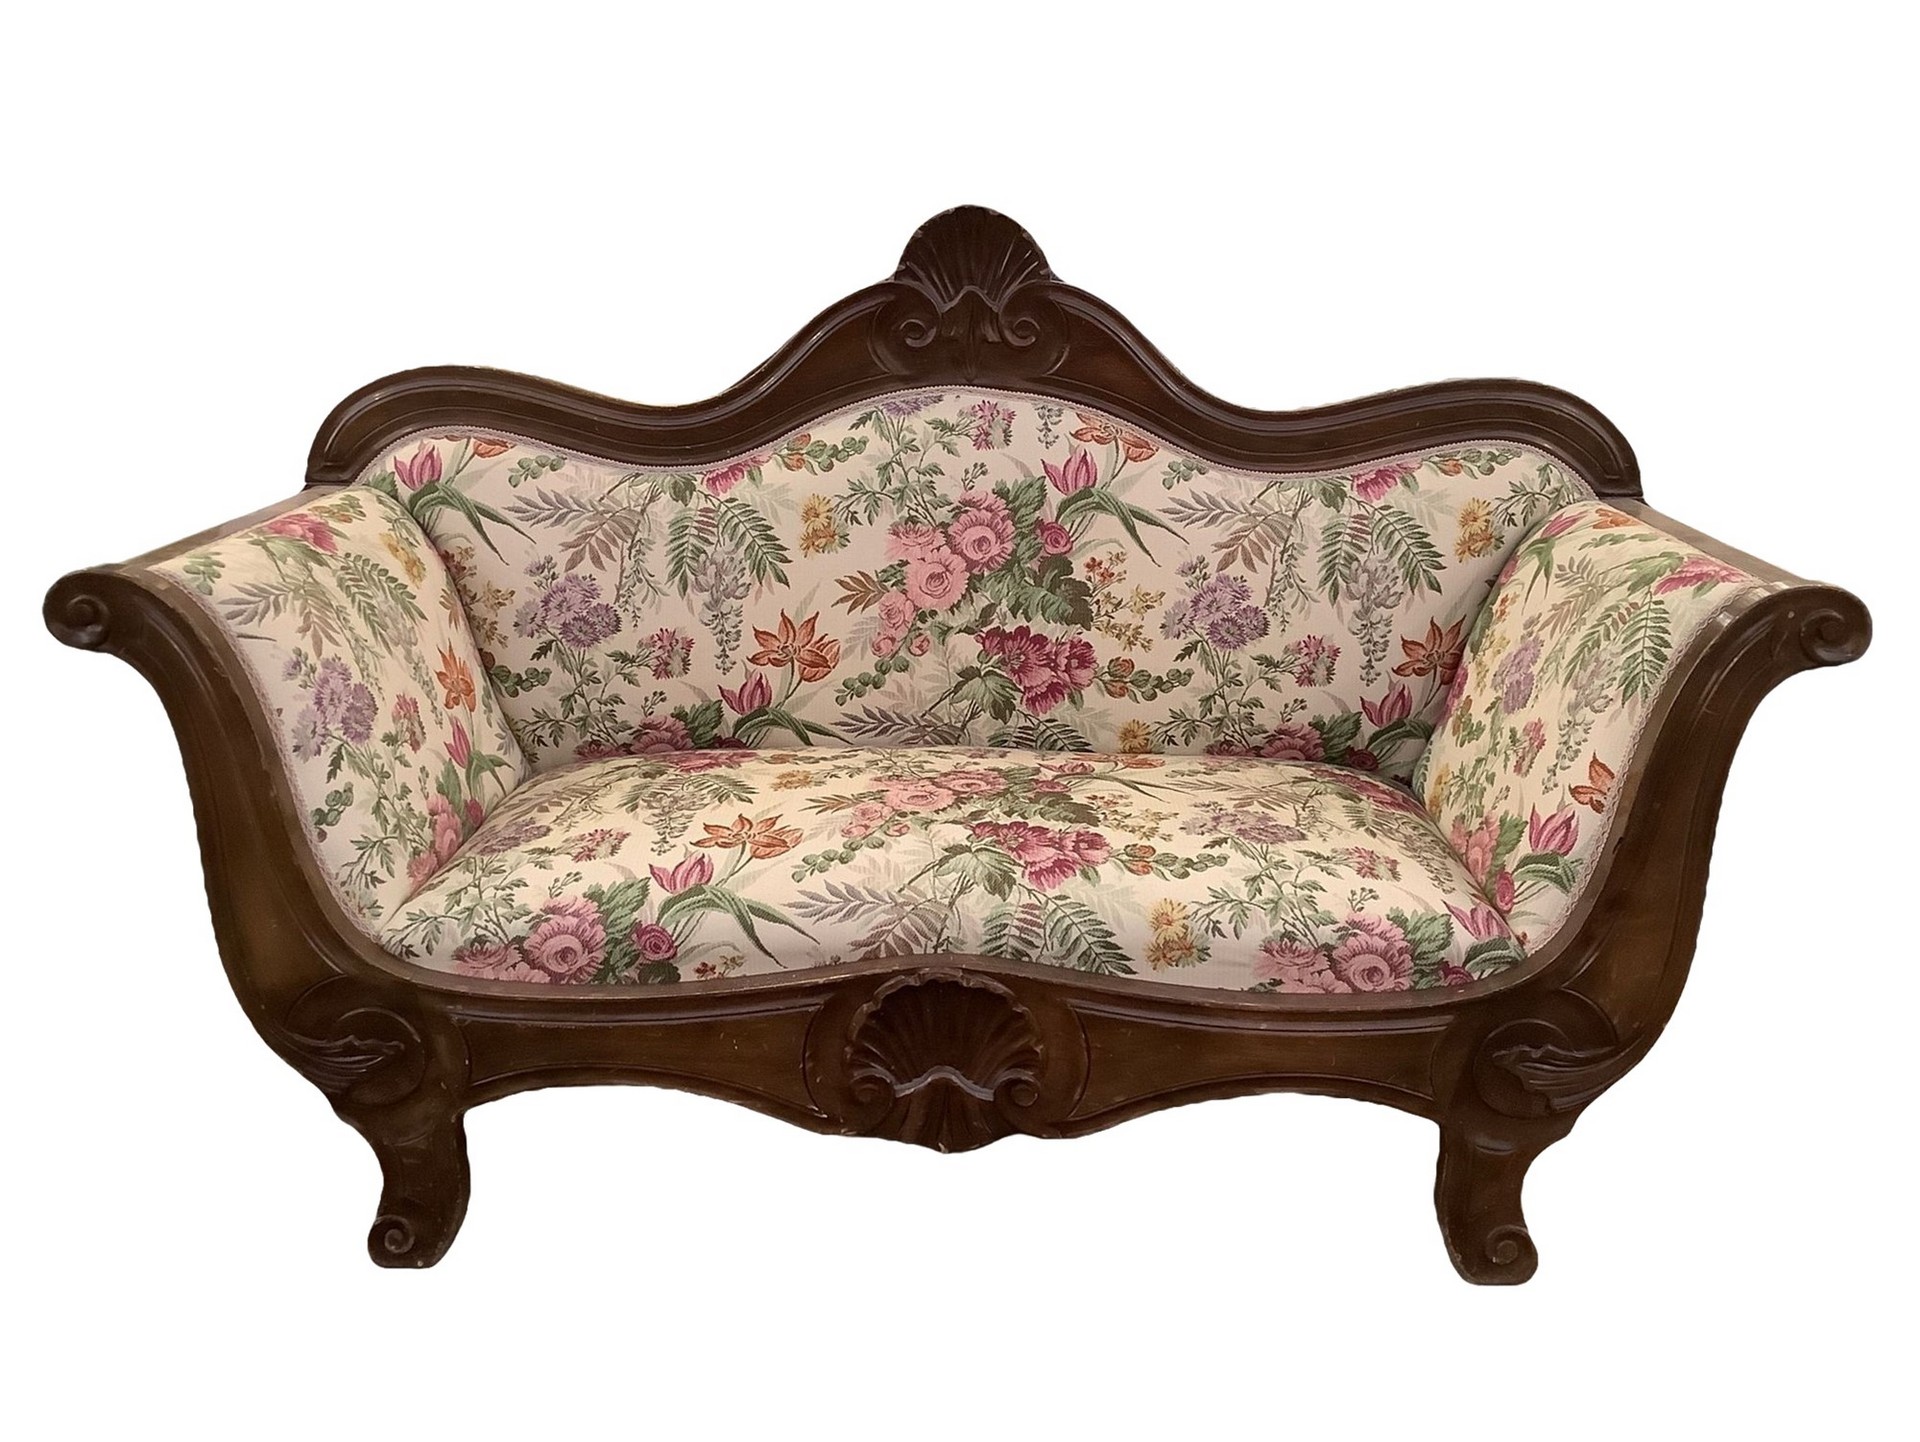 Two-seater sofa in Louis Philippe style walnut wood, early 20th century